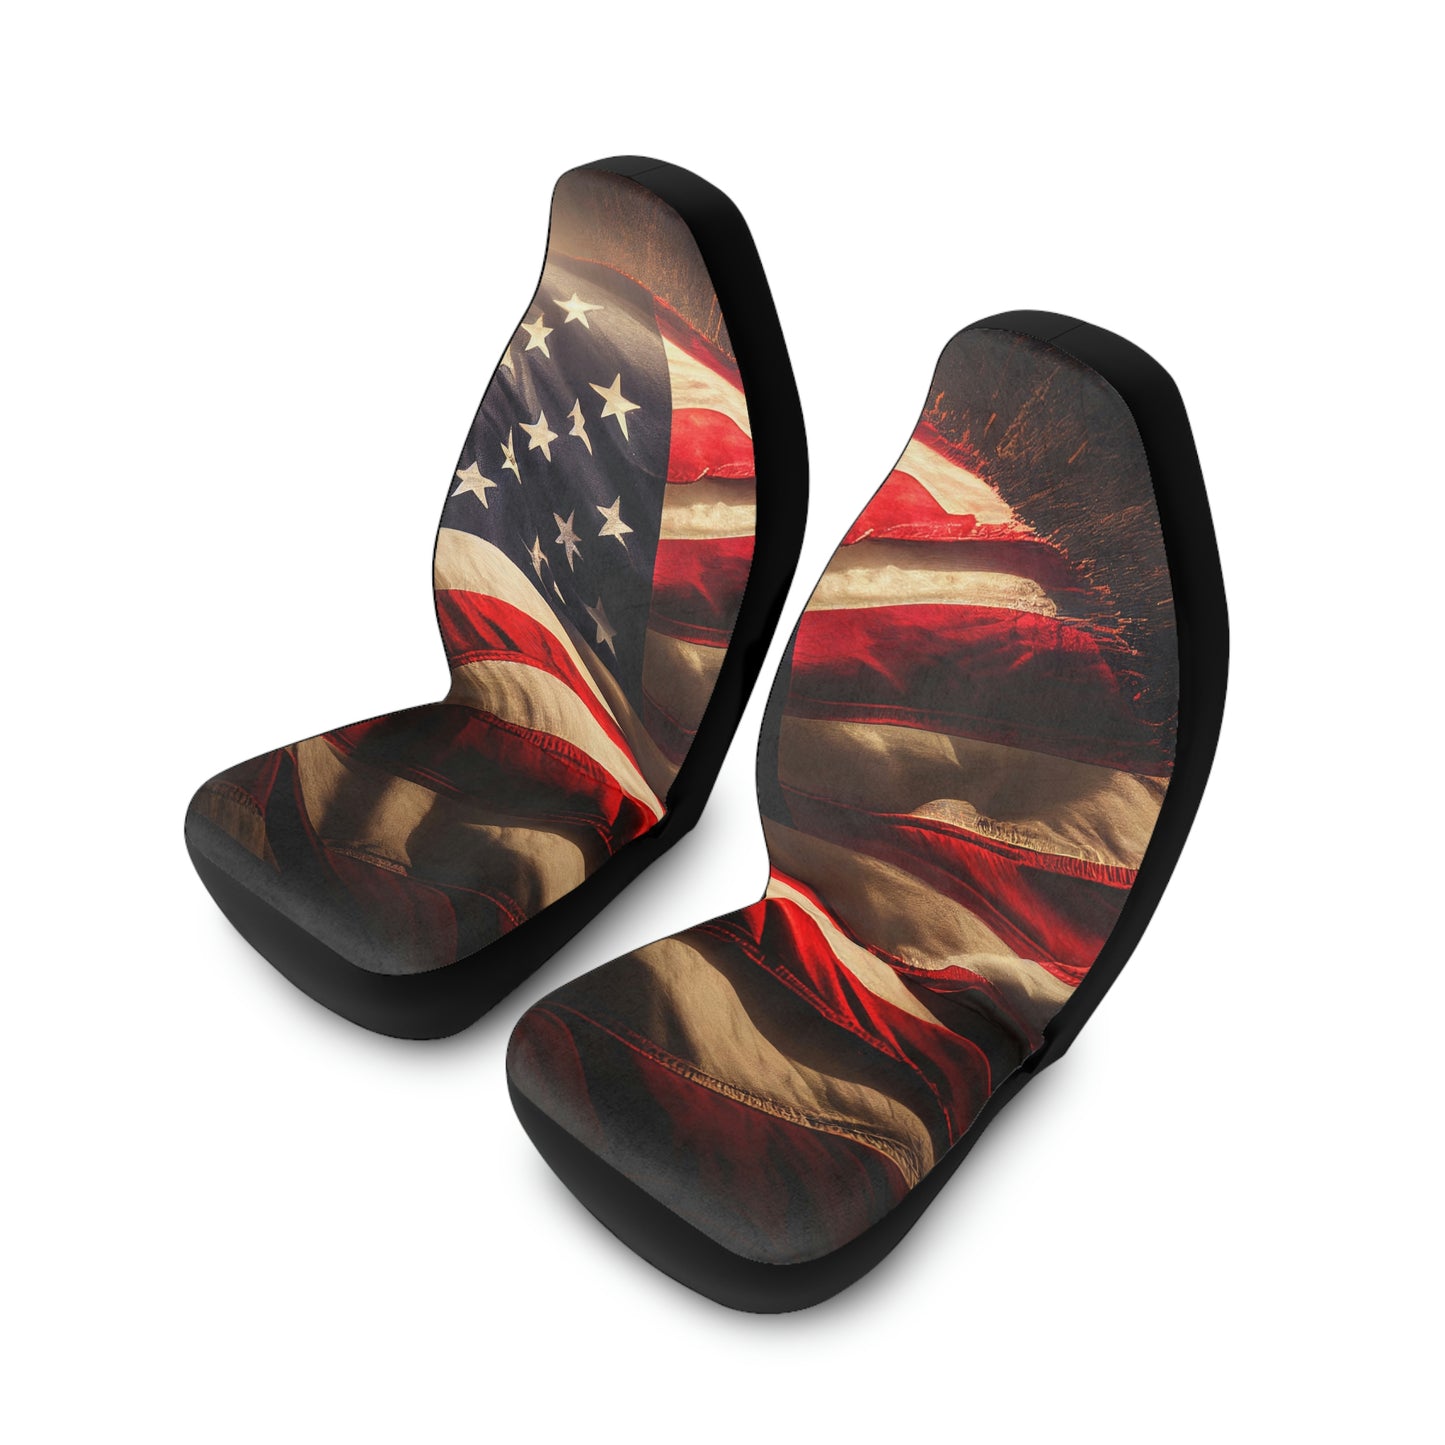 'Patriot' Polyester Car Seat Covers